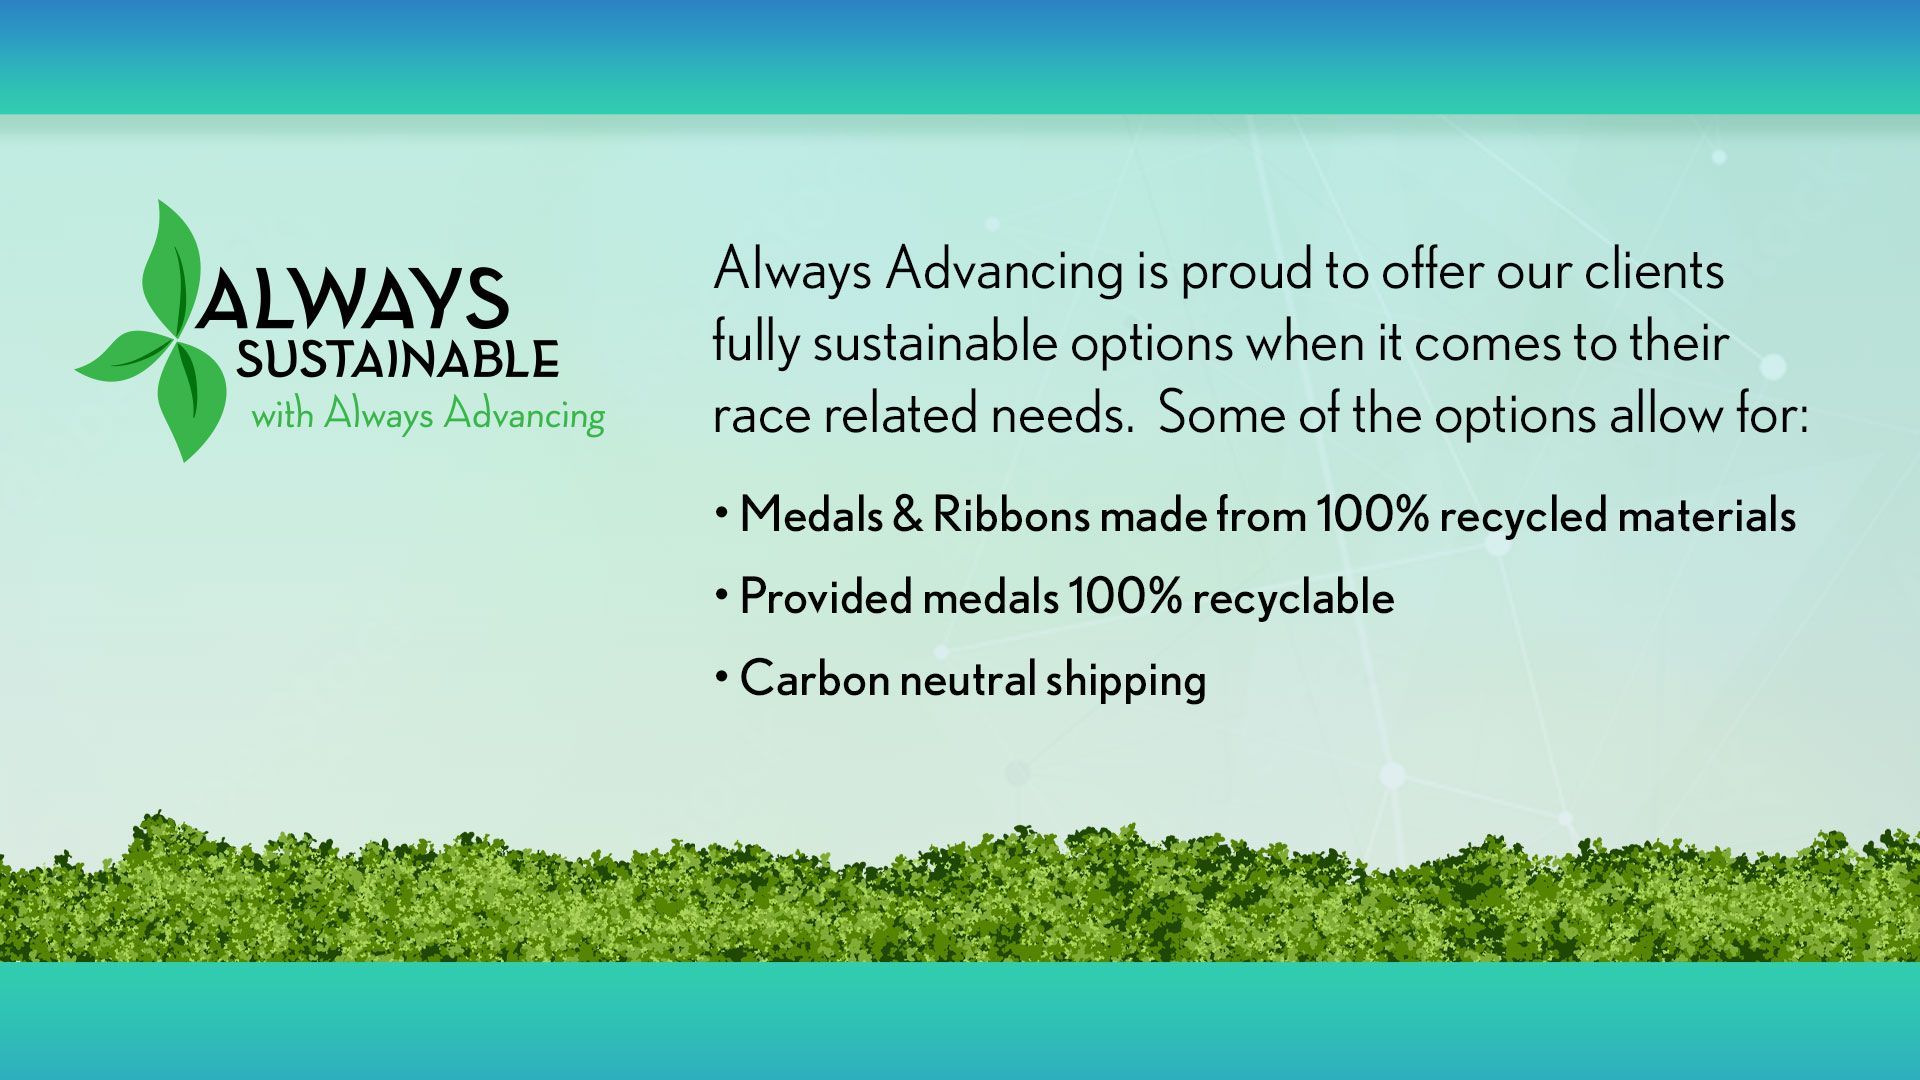 Always Sustainable Environmentally Friendly Options